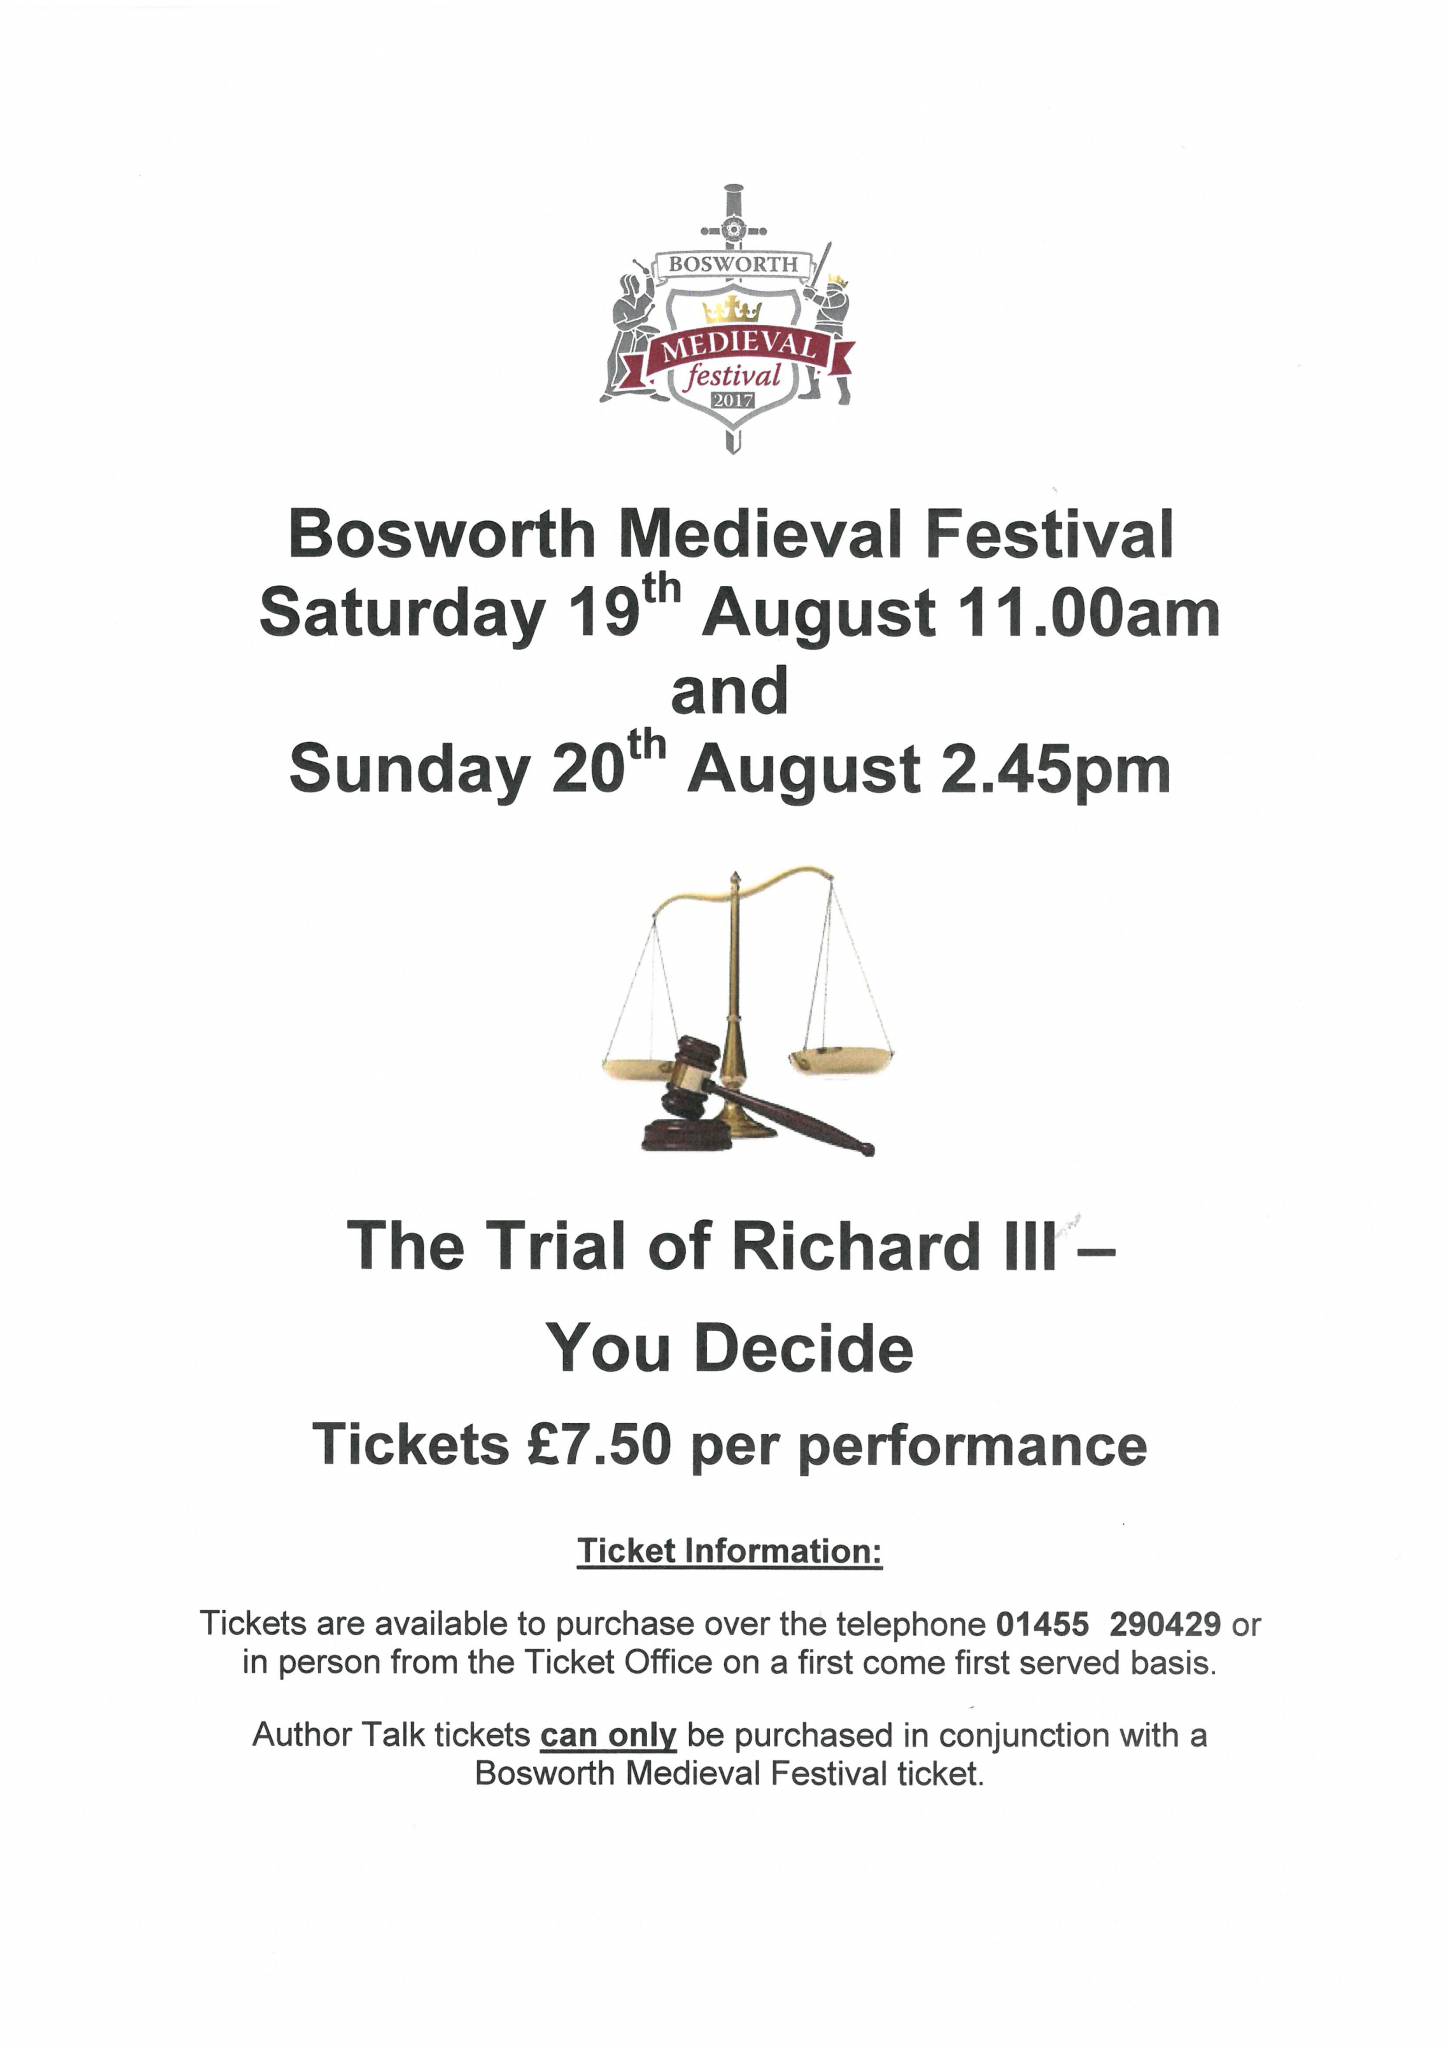 The Trial of Richard III: You Decide